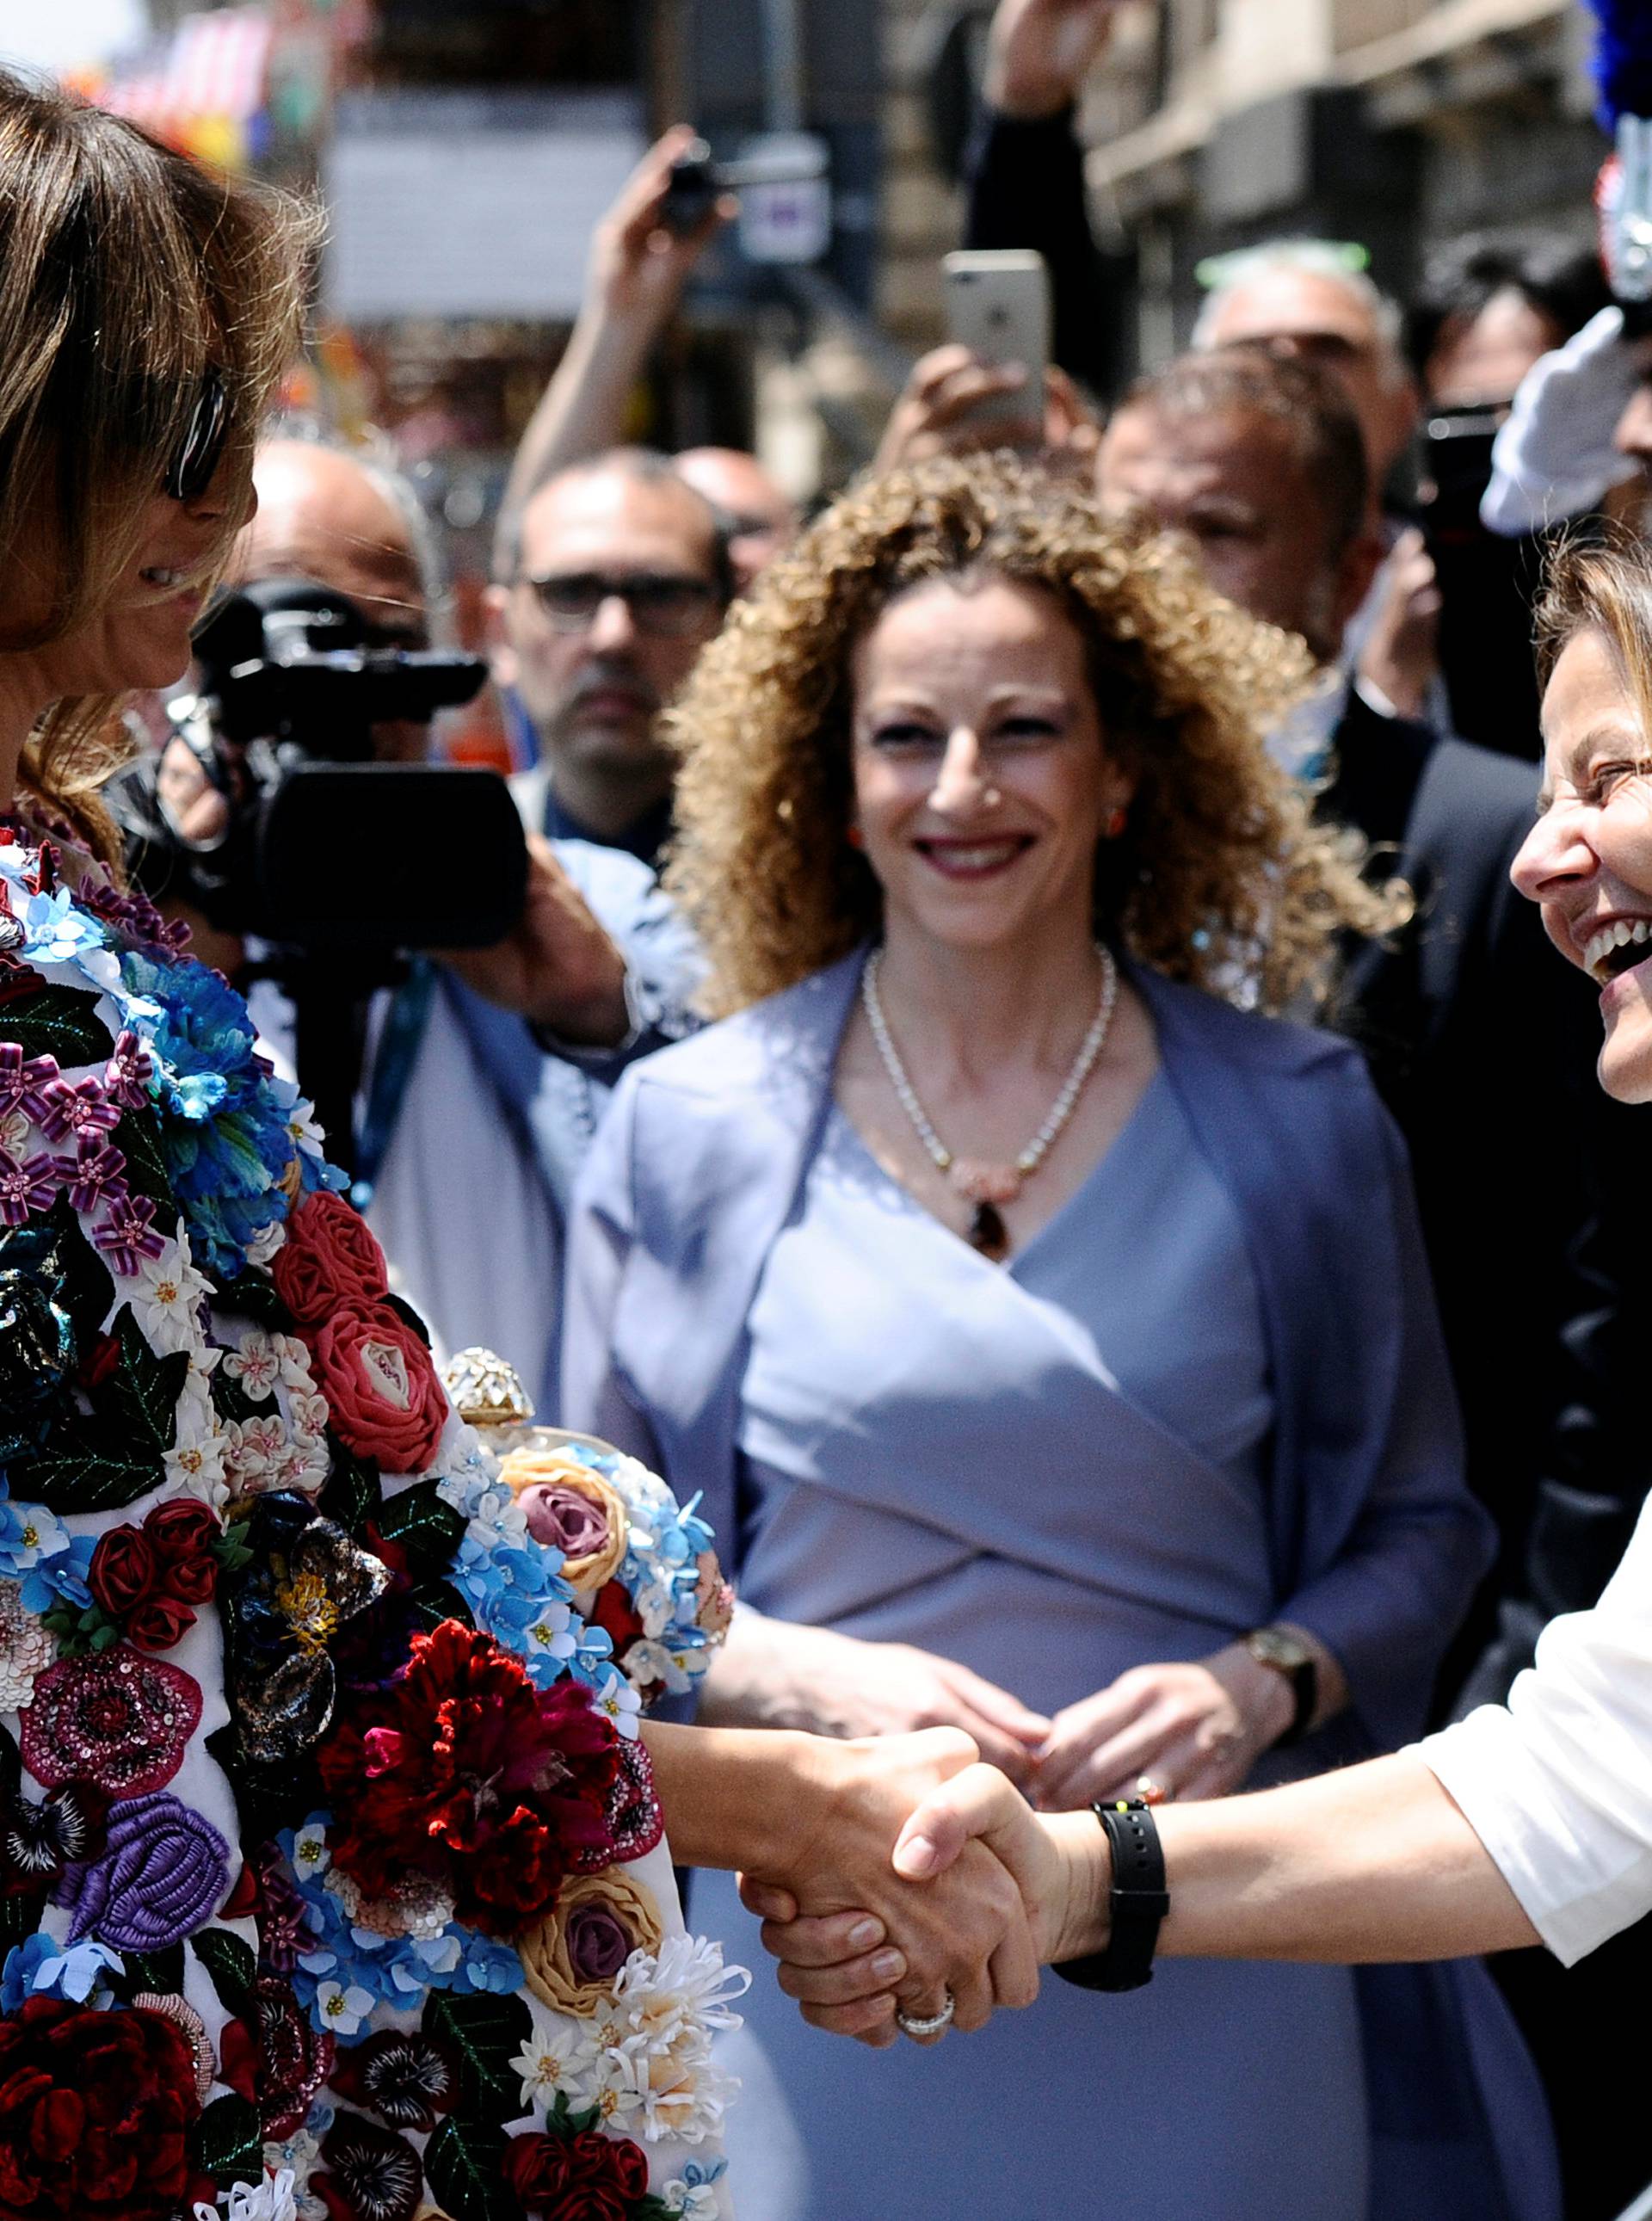 U.S. first lady Melania Trump shakes hands with Emanuela Mauro, wife of Italian PM Gentiloni, as she arrives at Duomo Square in the Sicilian town of Catania